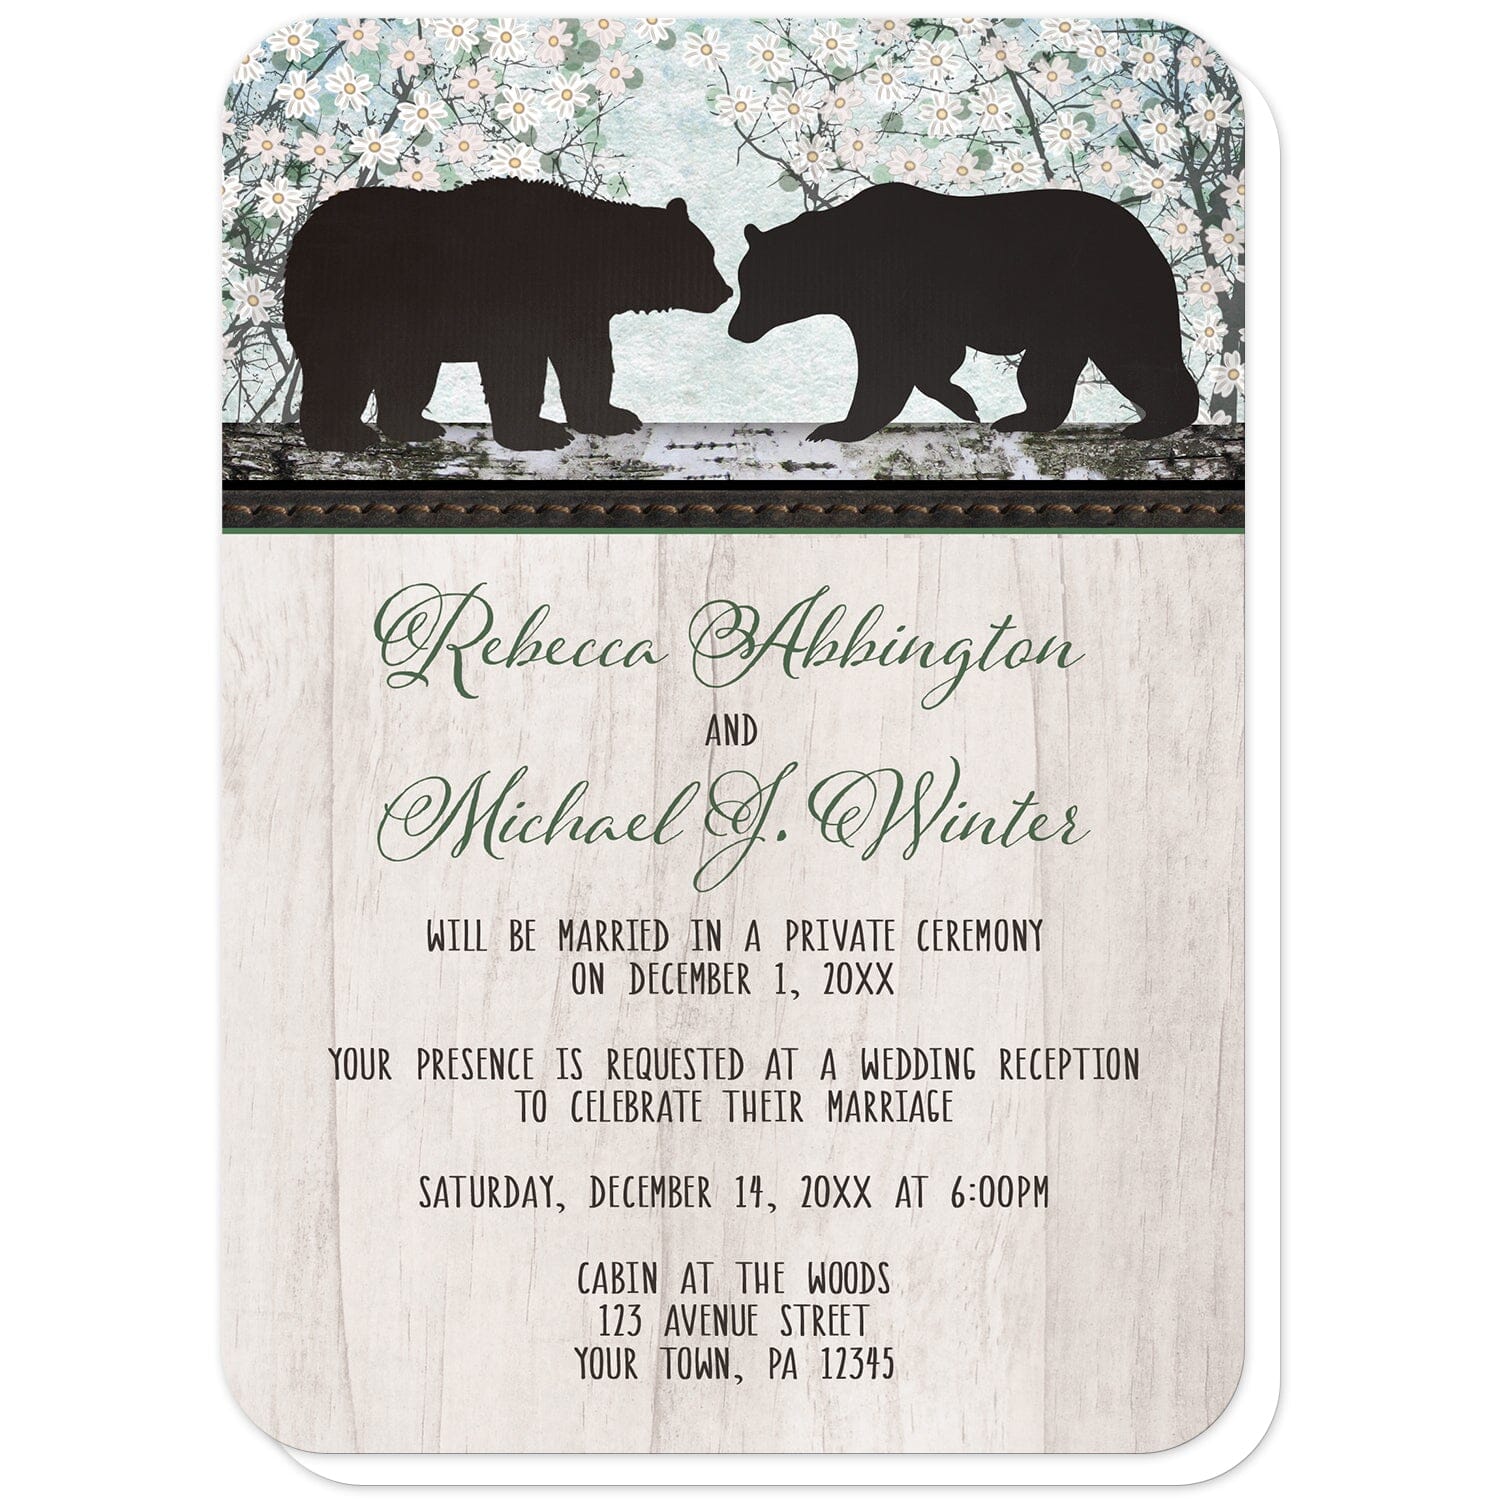 Rustic Bear Spring Floral Reception Only Invitations (with rounded corners) at Artistically Invited. Rustic bear floral wood reception only invitations with two silhouette bears on a wooden tree trunk-like stripe over a whimsical spring floral trees illustration. Your personalized post-wedding reception details are custom printed in black and green over a light rustic wood image background.